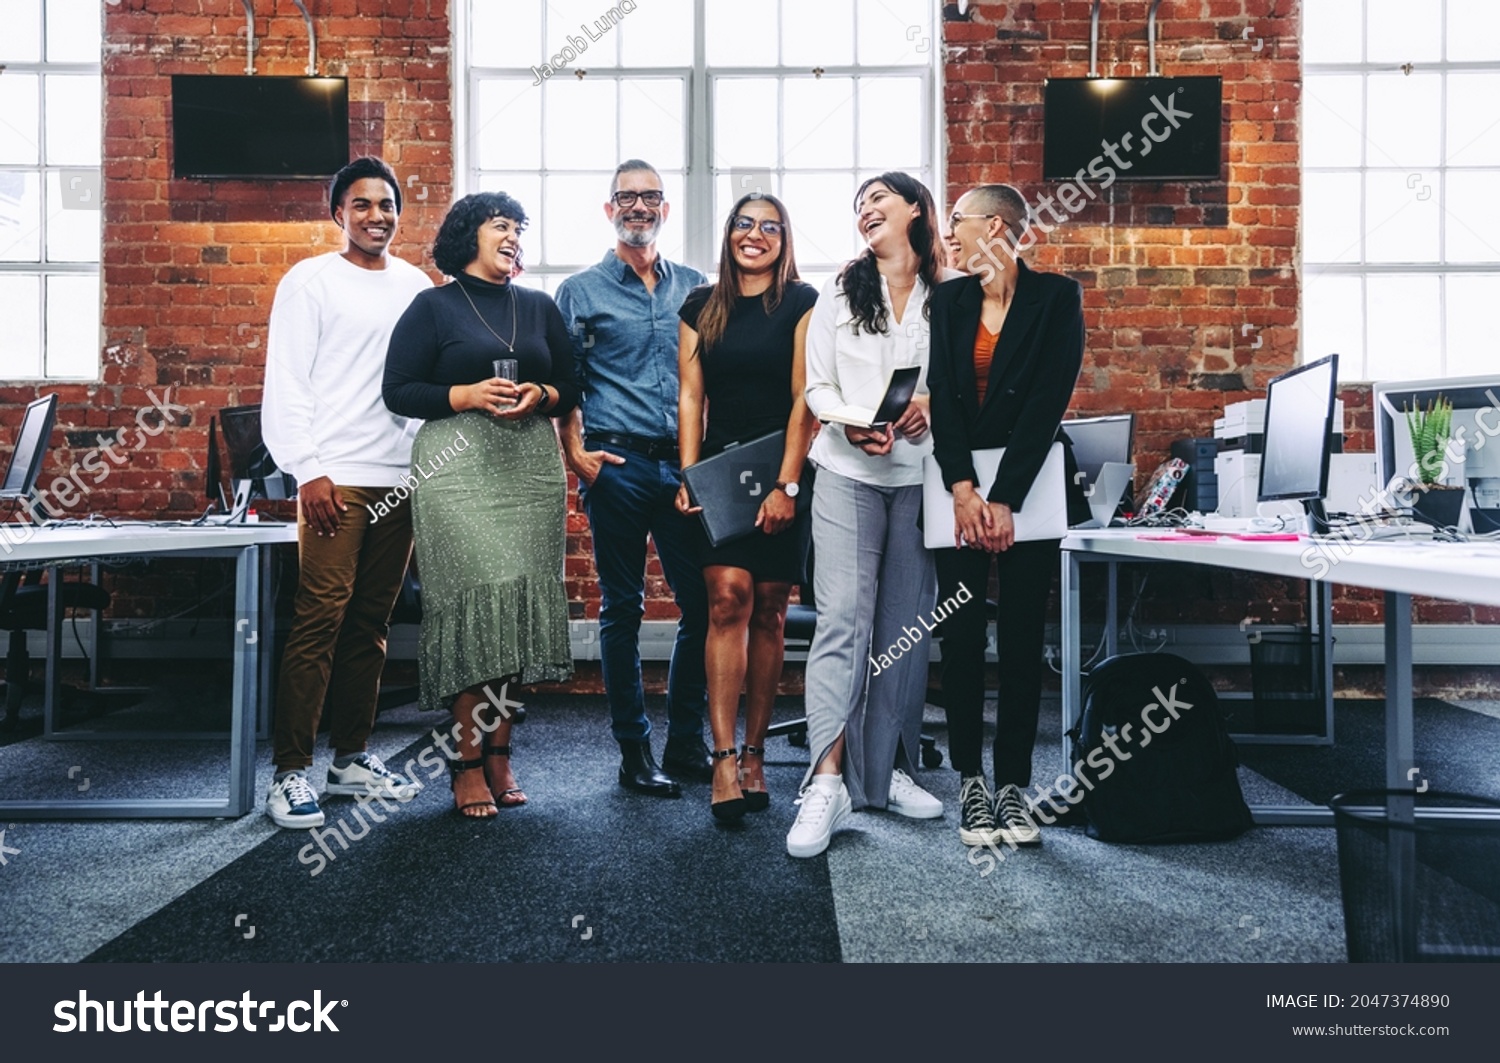 Happy group of businesspeople laughing cheerfully in a modern workplace. Diverse group of colleagues enjoying working together in an office. Successful businesspeople standing together. #2047374890